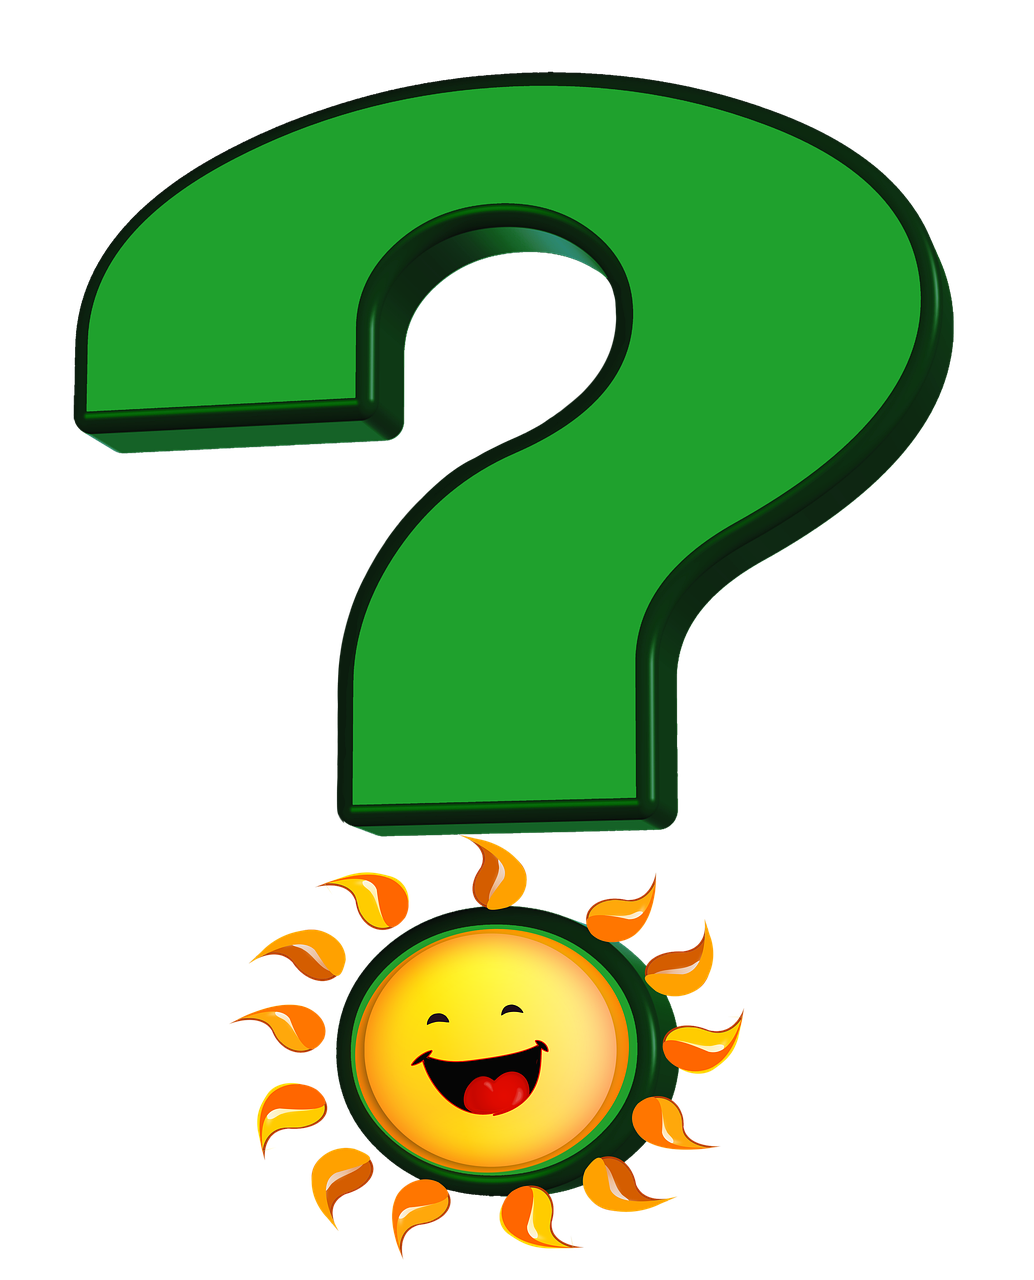 A green question mark with the sun image at the base.